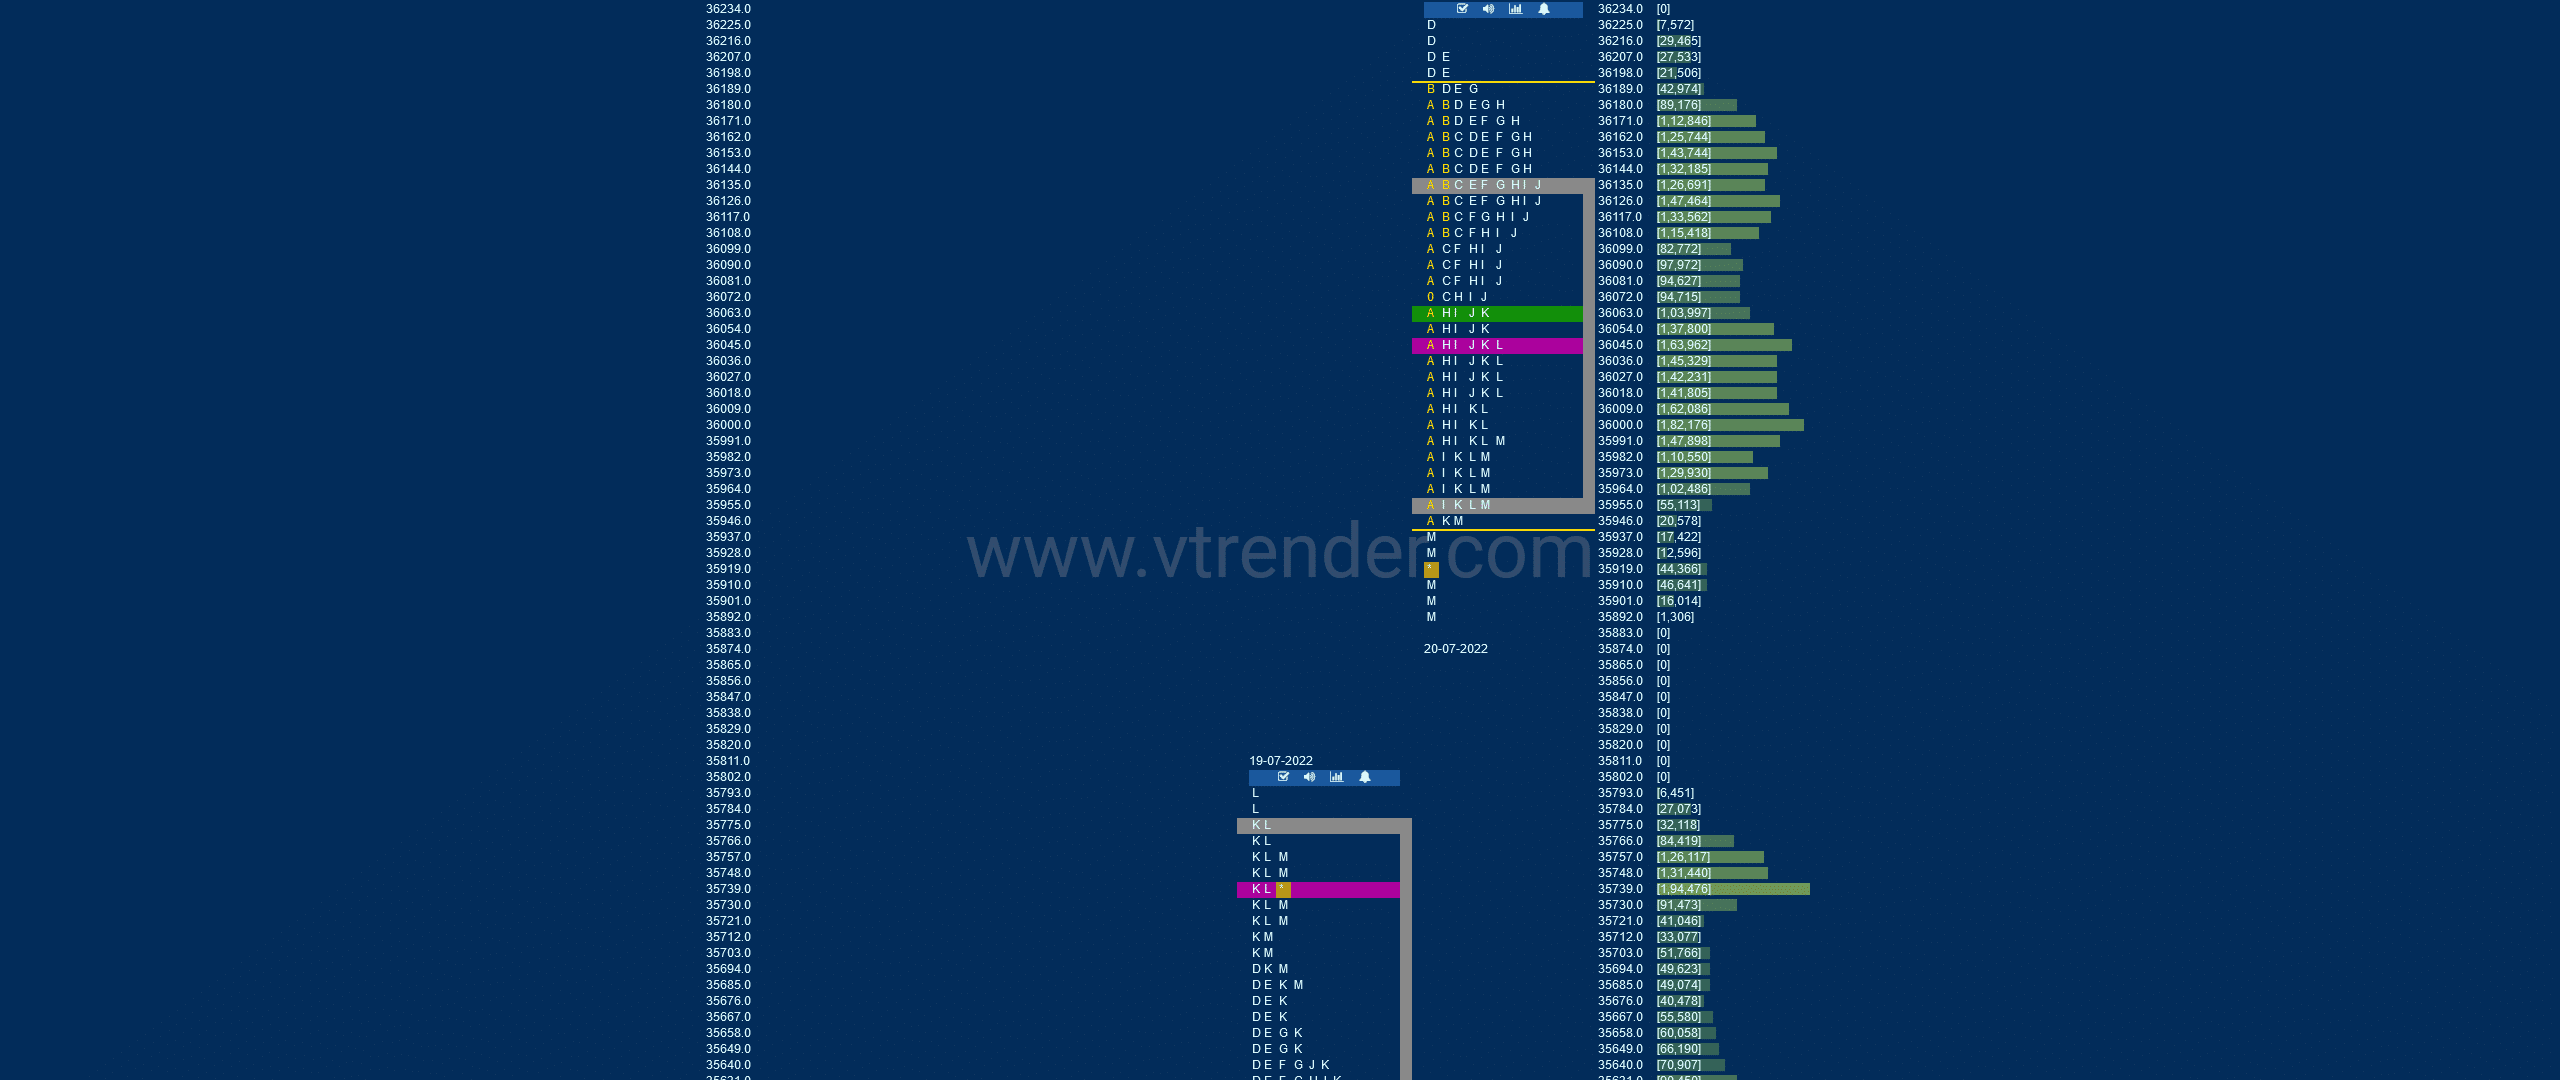 Bnf 14 Market Profile Analysis Dated 20Th Jul 2022 Banknifty Futures, Charts, Day Trading, Intraday Trading, Intraday Trading Strategies, Market Profile, Market Profile Trading Strategies, Nifty Futures, Order Flow Analysis, Support And Resistance, Technical Analysis, Trading Strategies, Volume Profile Trading